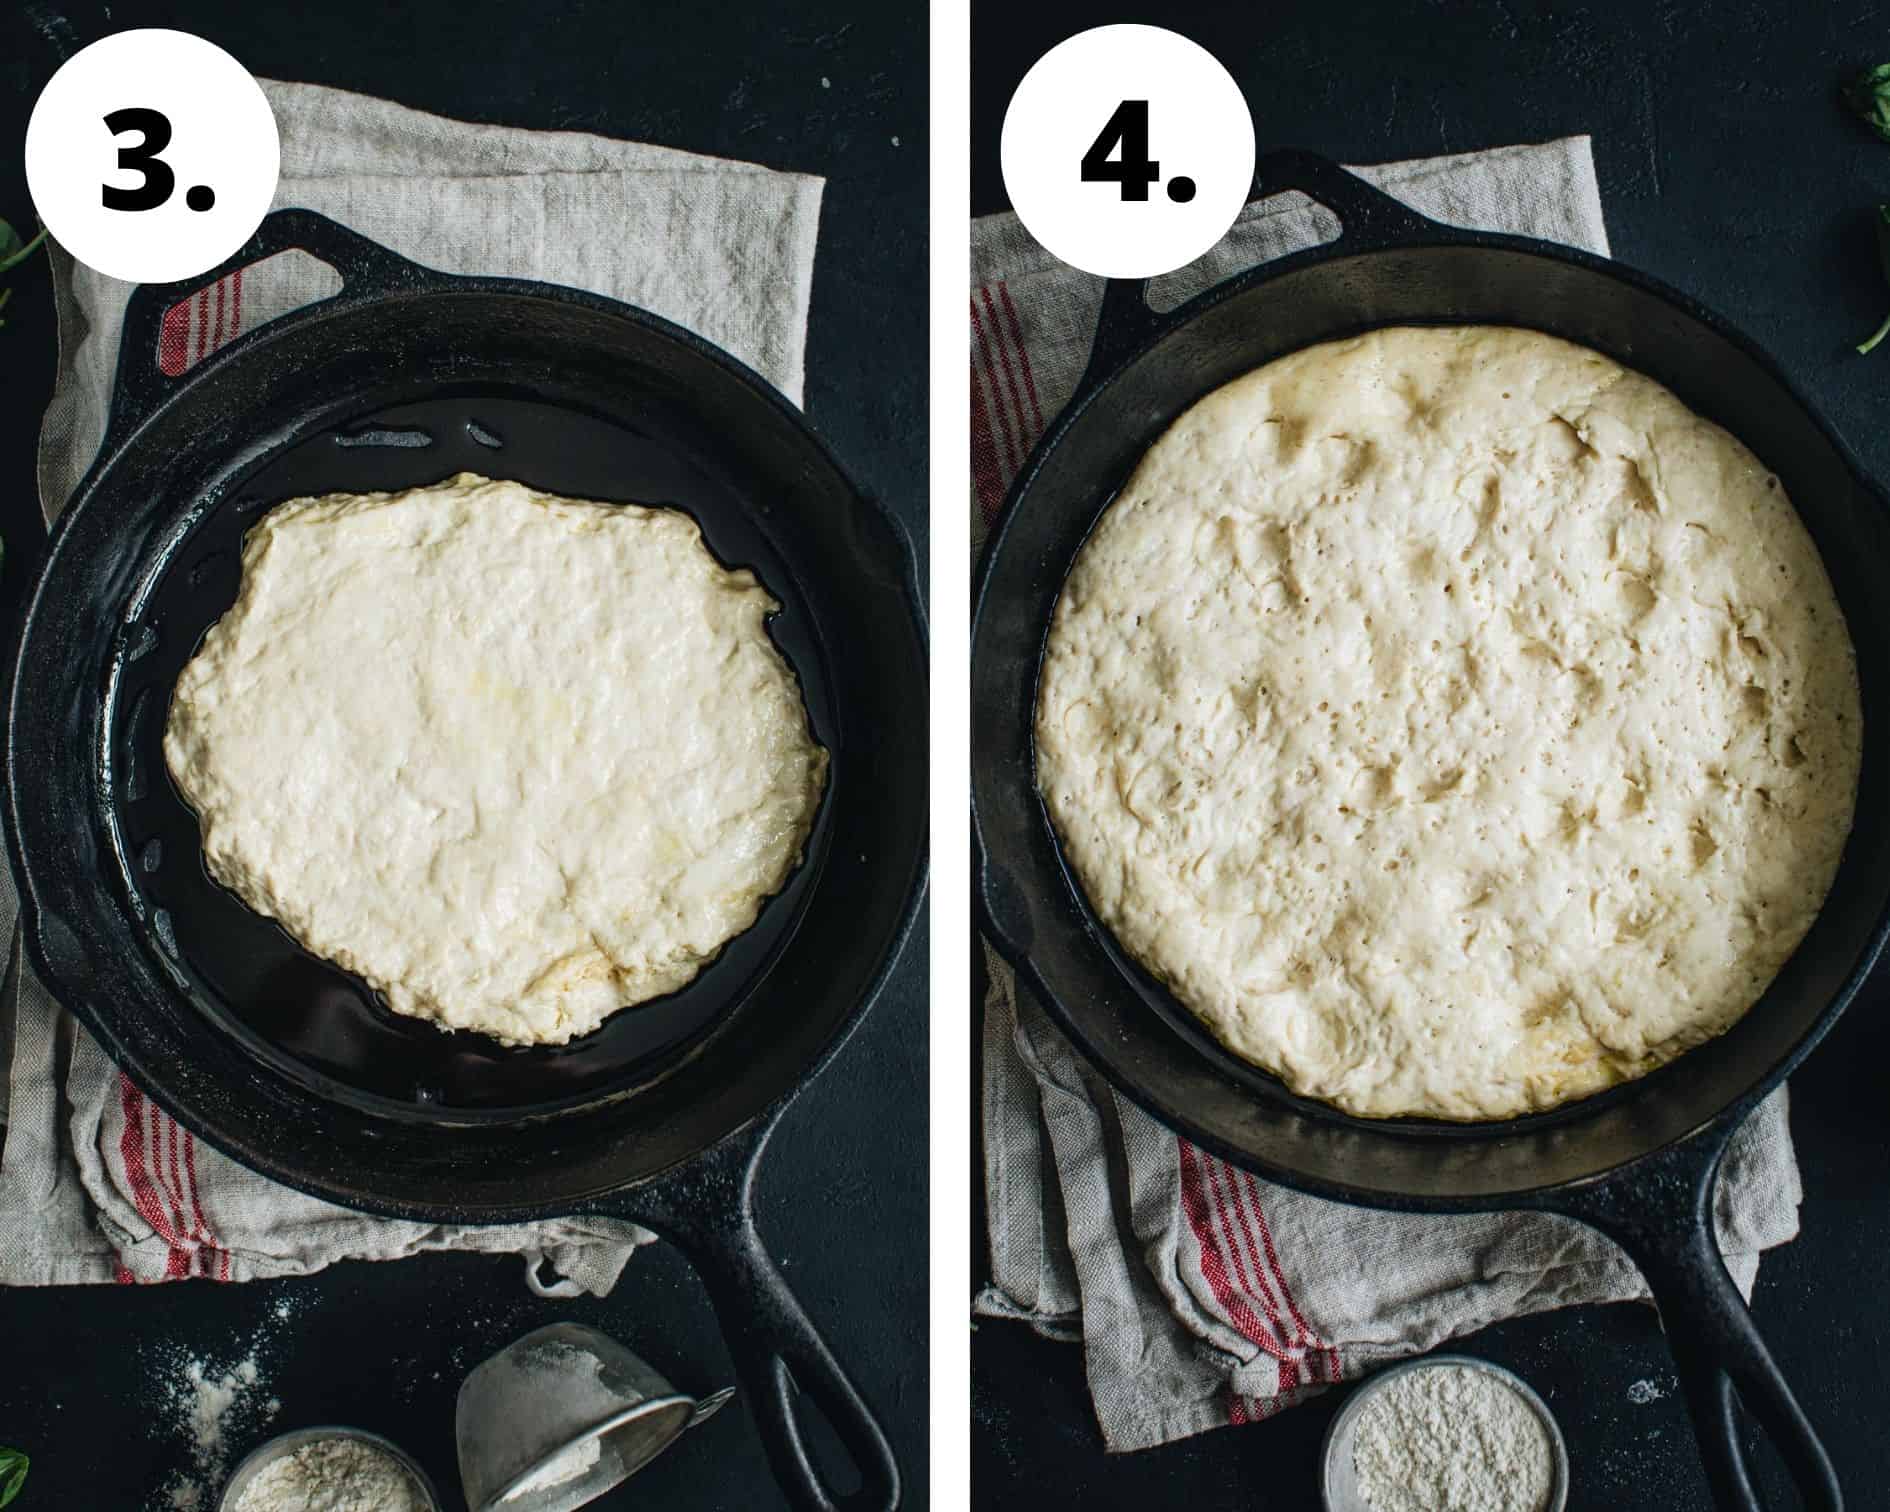 Cast iron skillet pizza process steps 3 and 4.